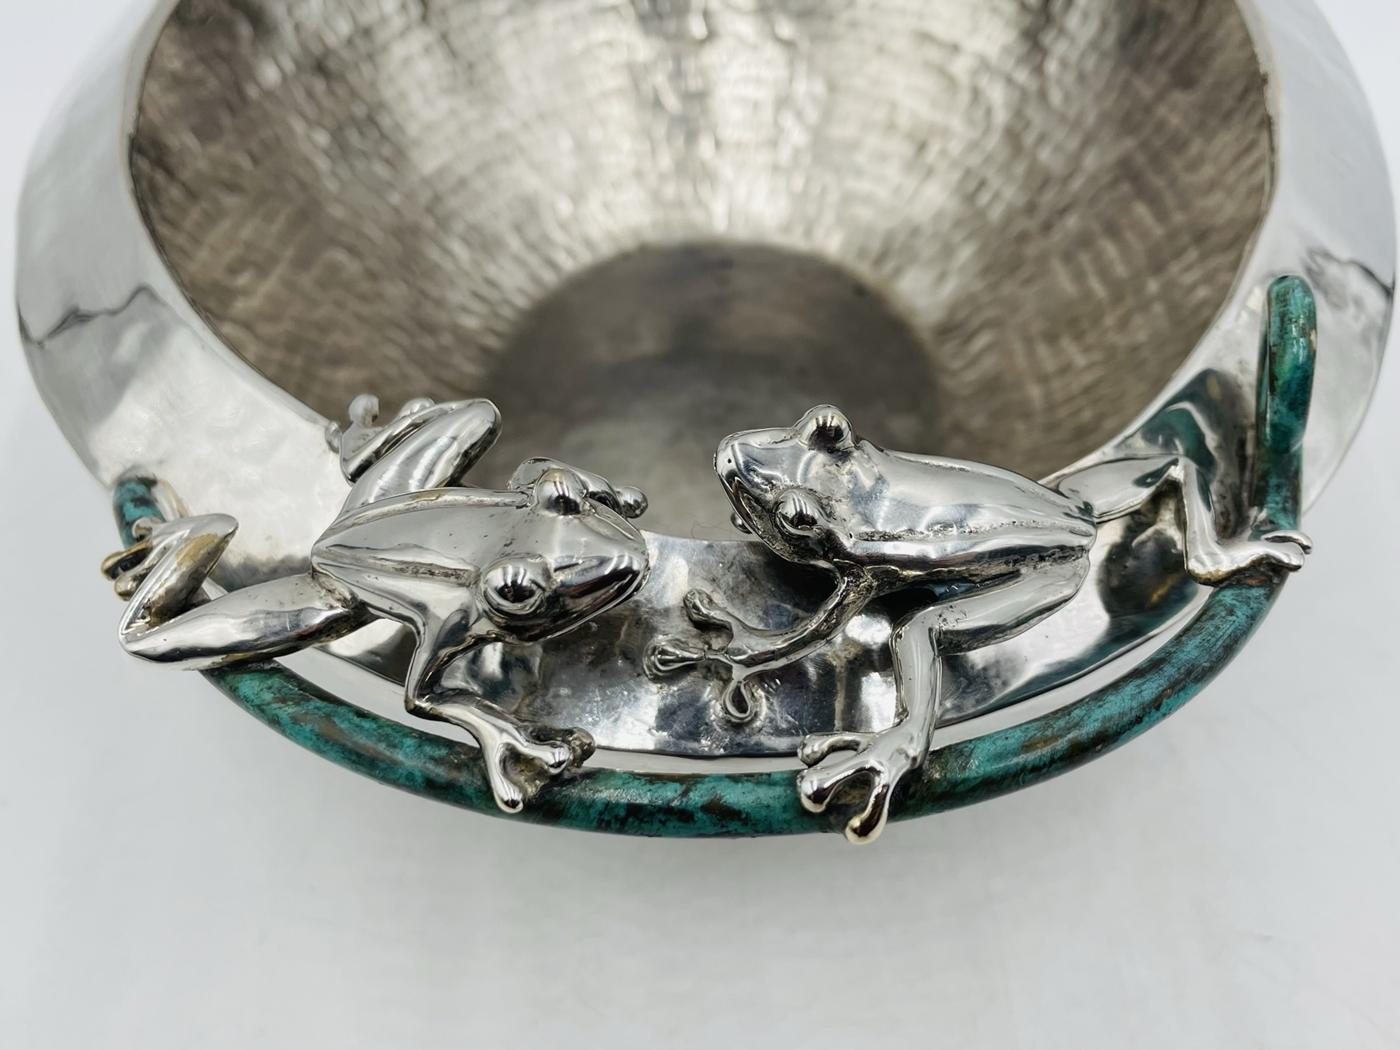 Large Silver-Plated Bowl With Frogs Handles by Emilia Castillo, Mexico 21st Cent For Sale 3